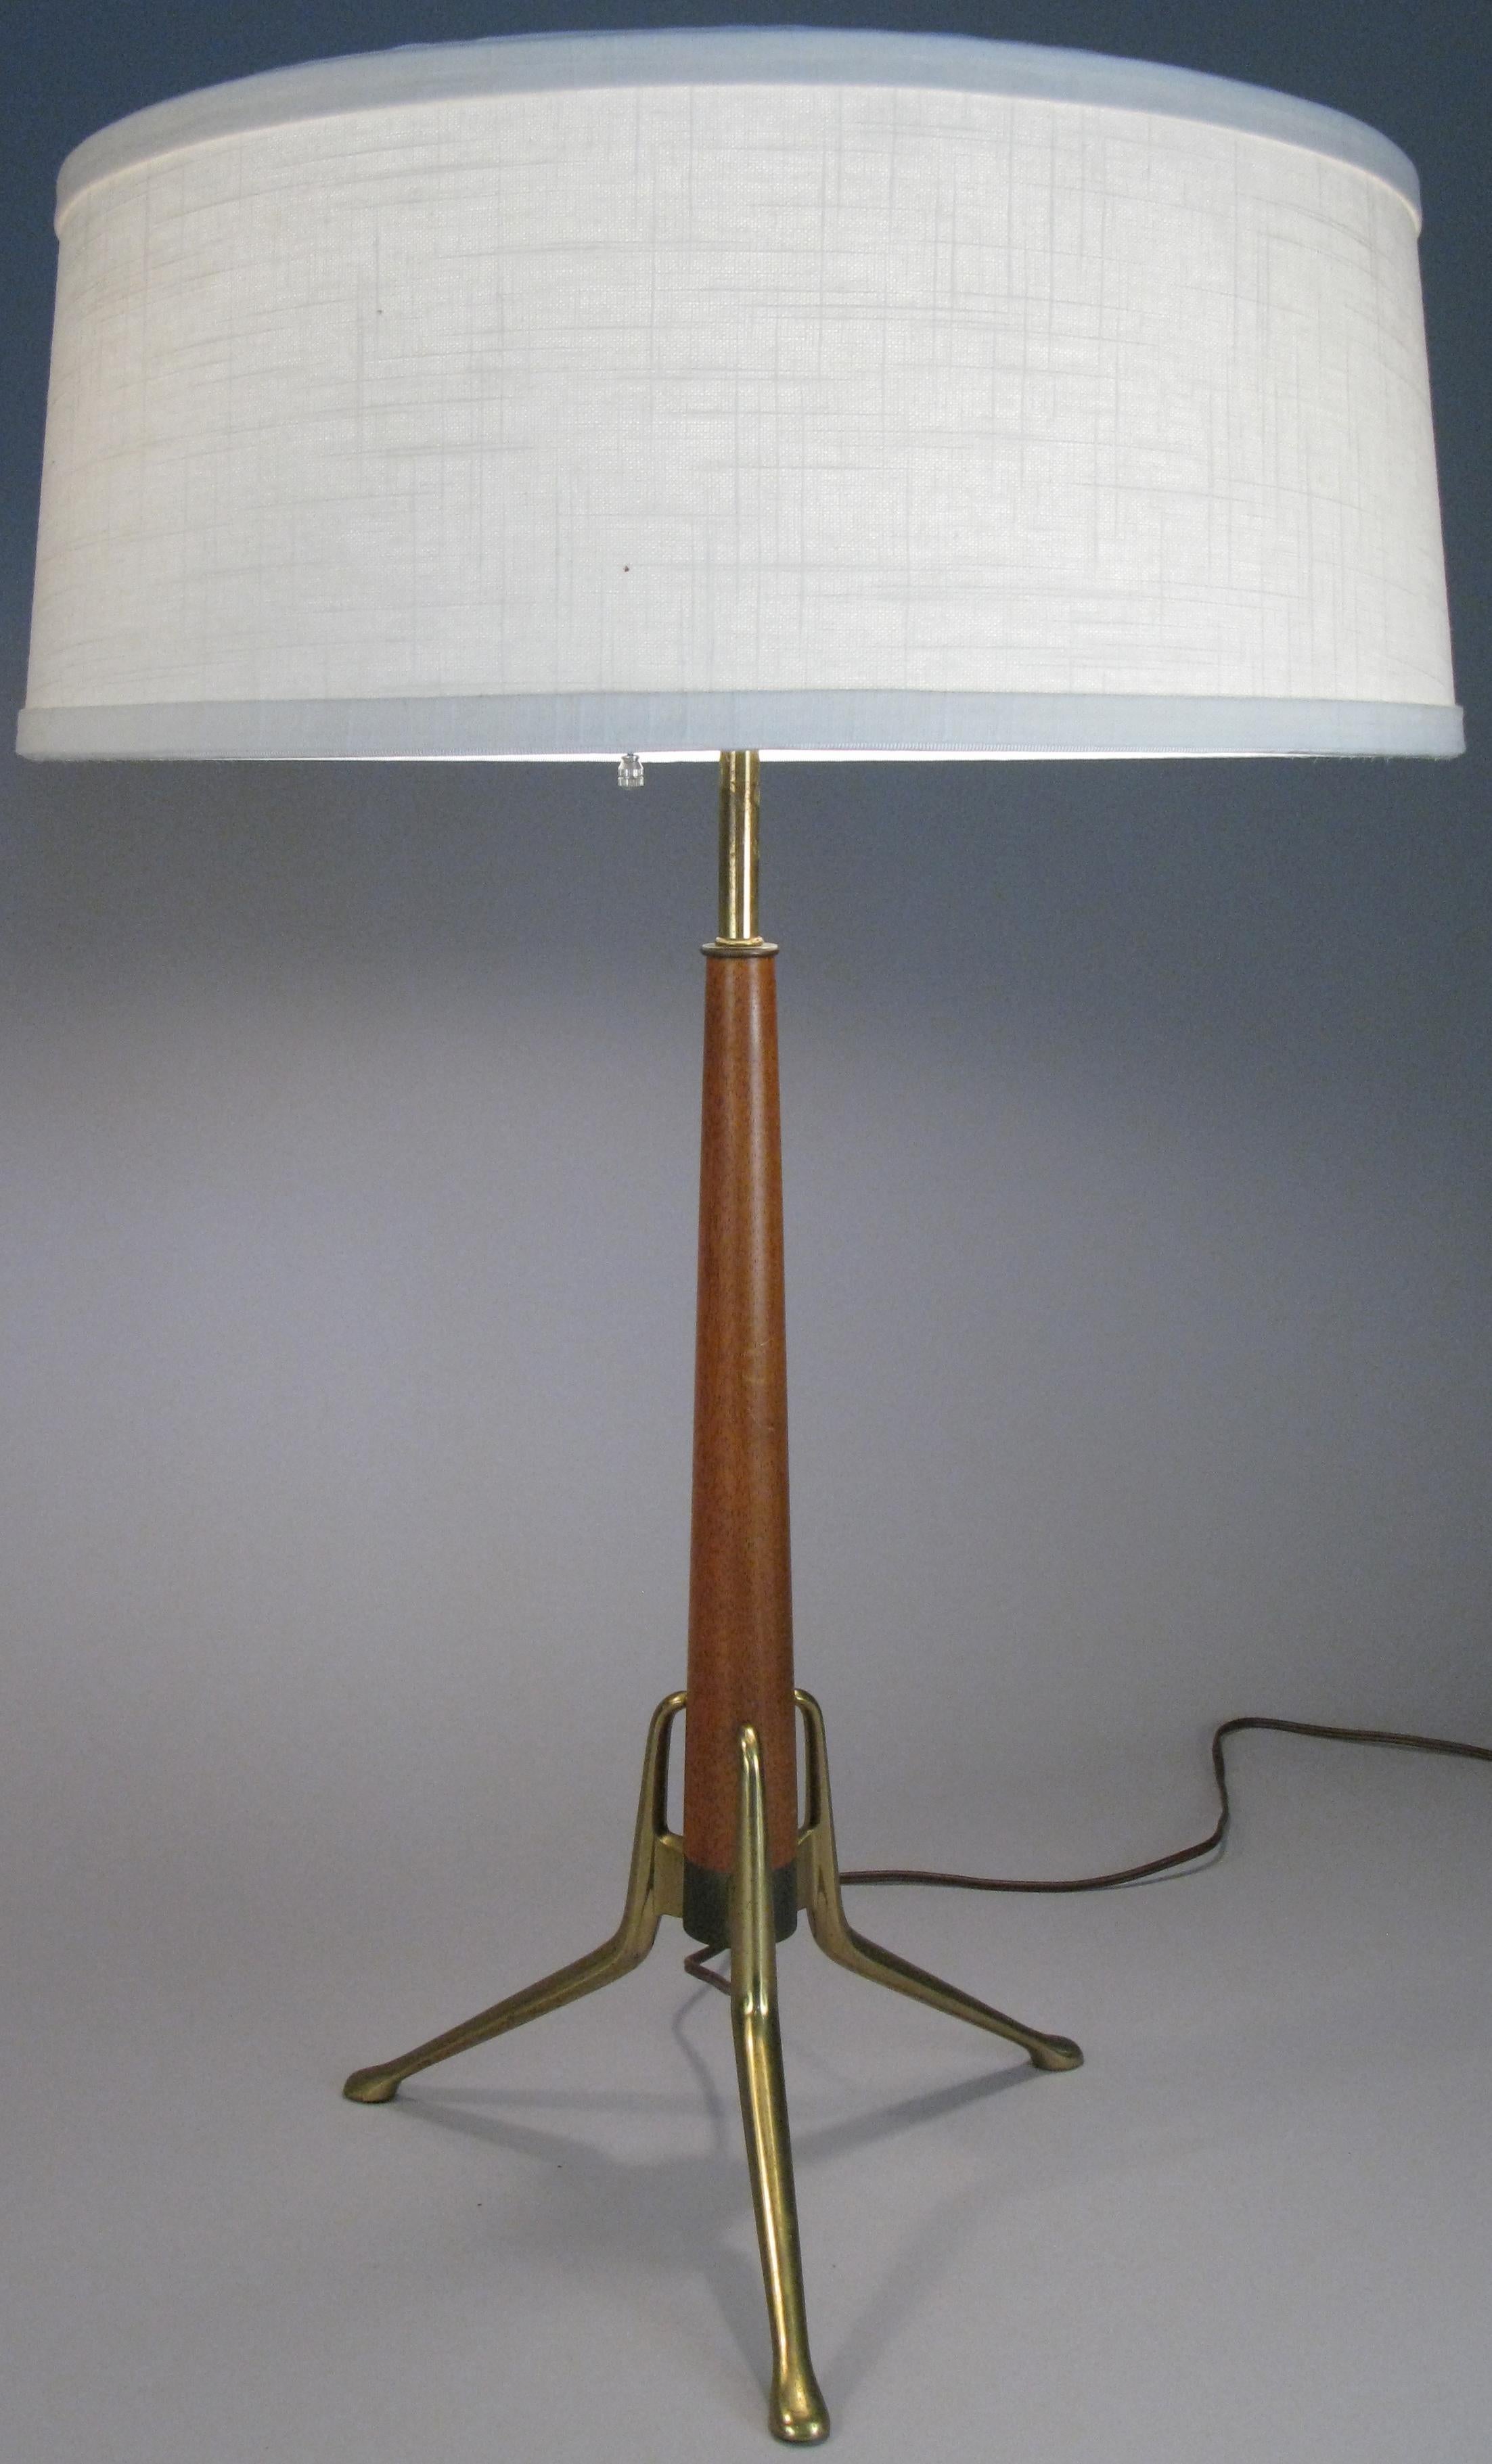 A stunning matched pair of 1950s table lamps designed by Gerald Thurston for Lightolier. Made with a tapered walnut stem raised on a brass base with three legs. These have Lightolier's signature triple socket fitting, giving the option of having